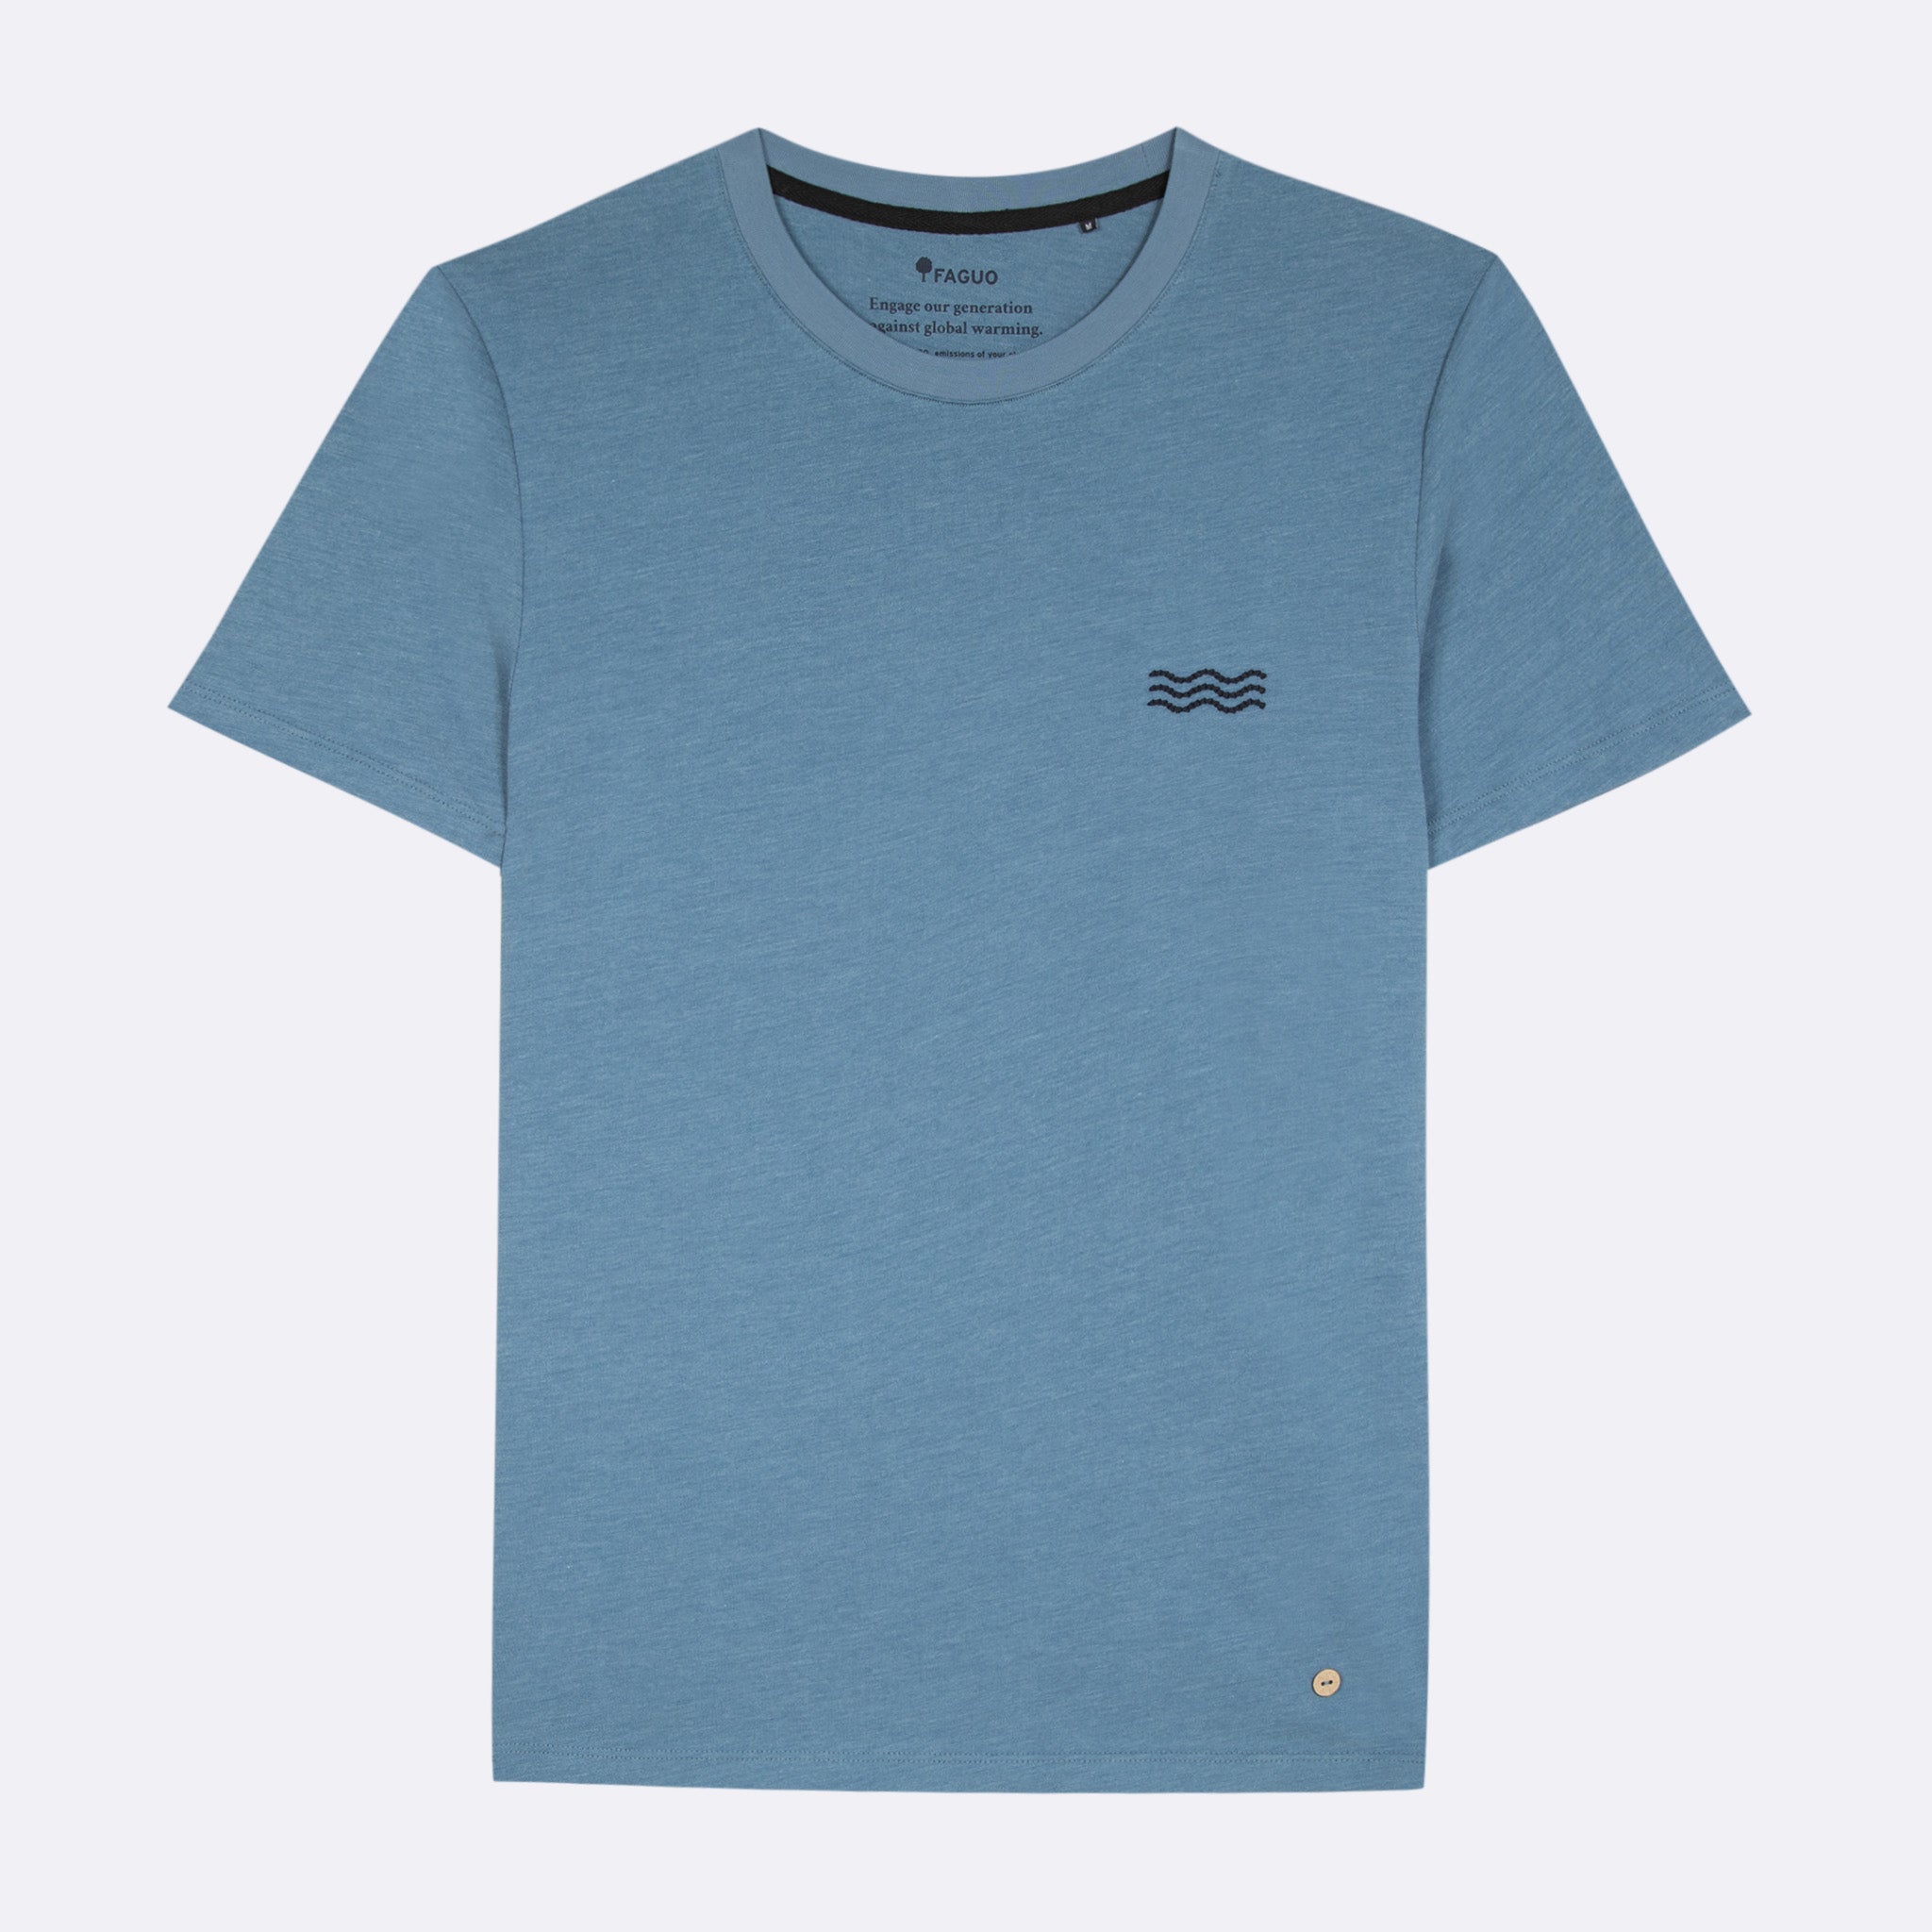 Faguo - Blue t-shirt in cotton waves - Arcy - The Good Chic